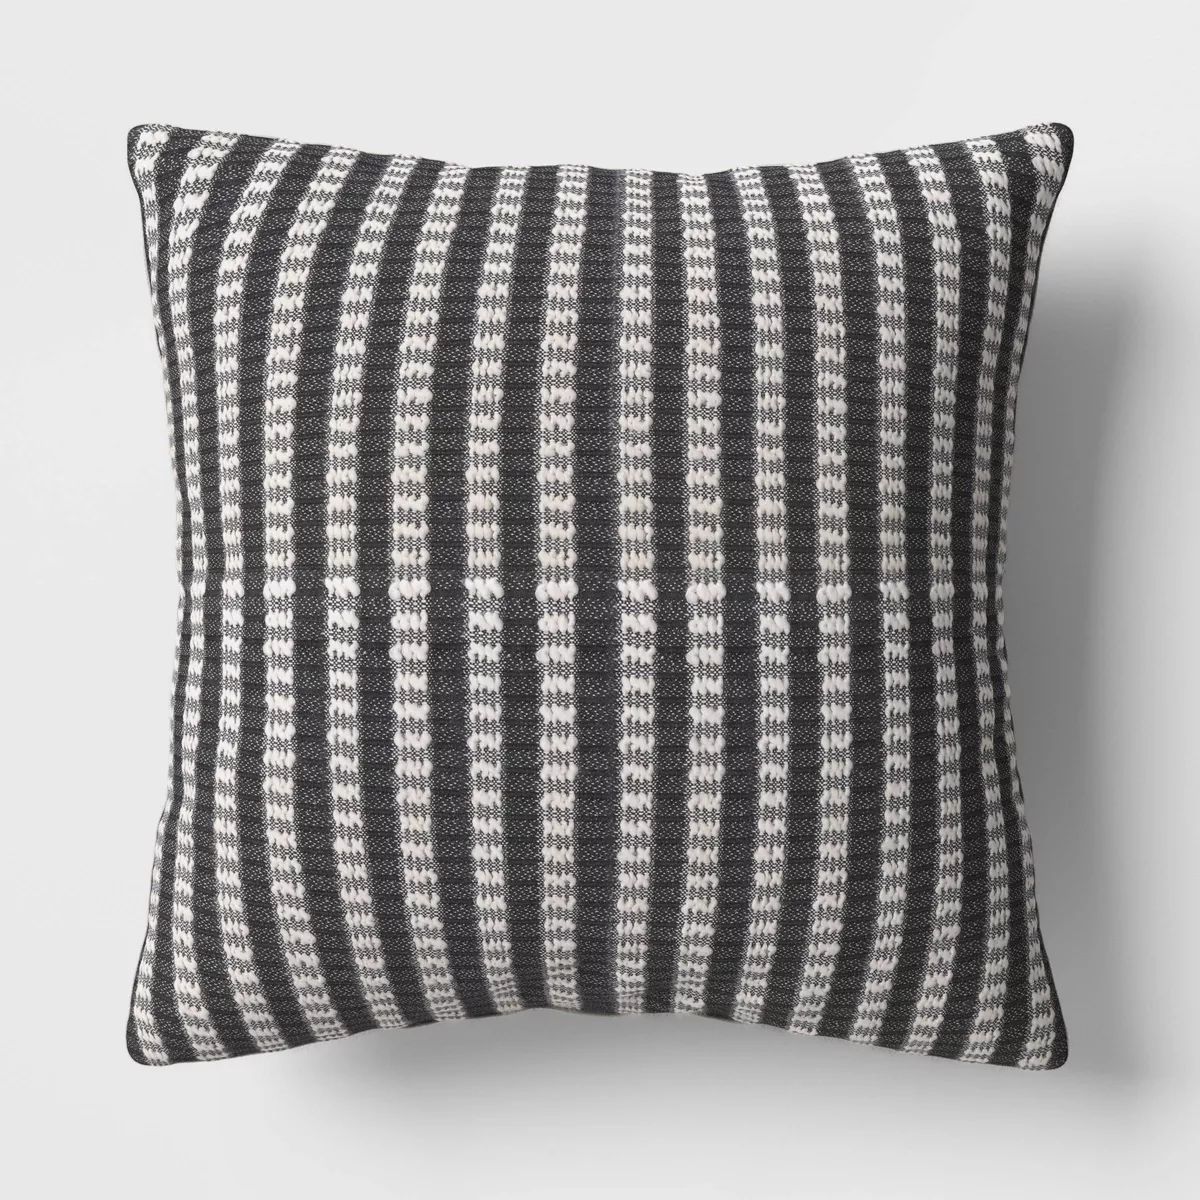 18"x18" Stitched Stripe Square Outdoor Throw Pillow Assorted Grays - Threshold™ | Target